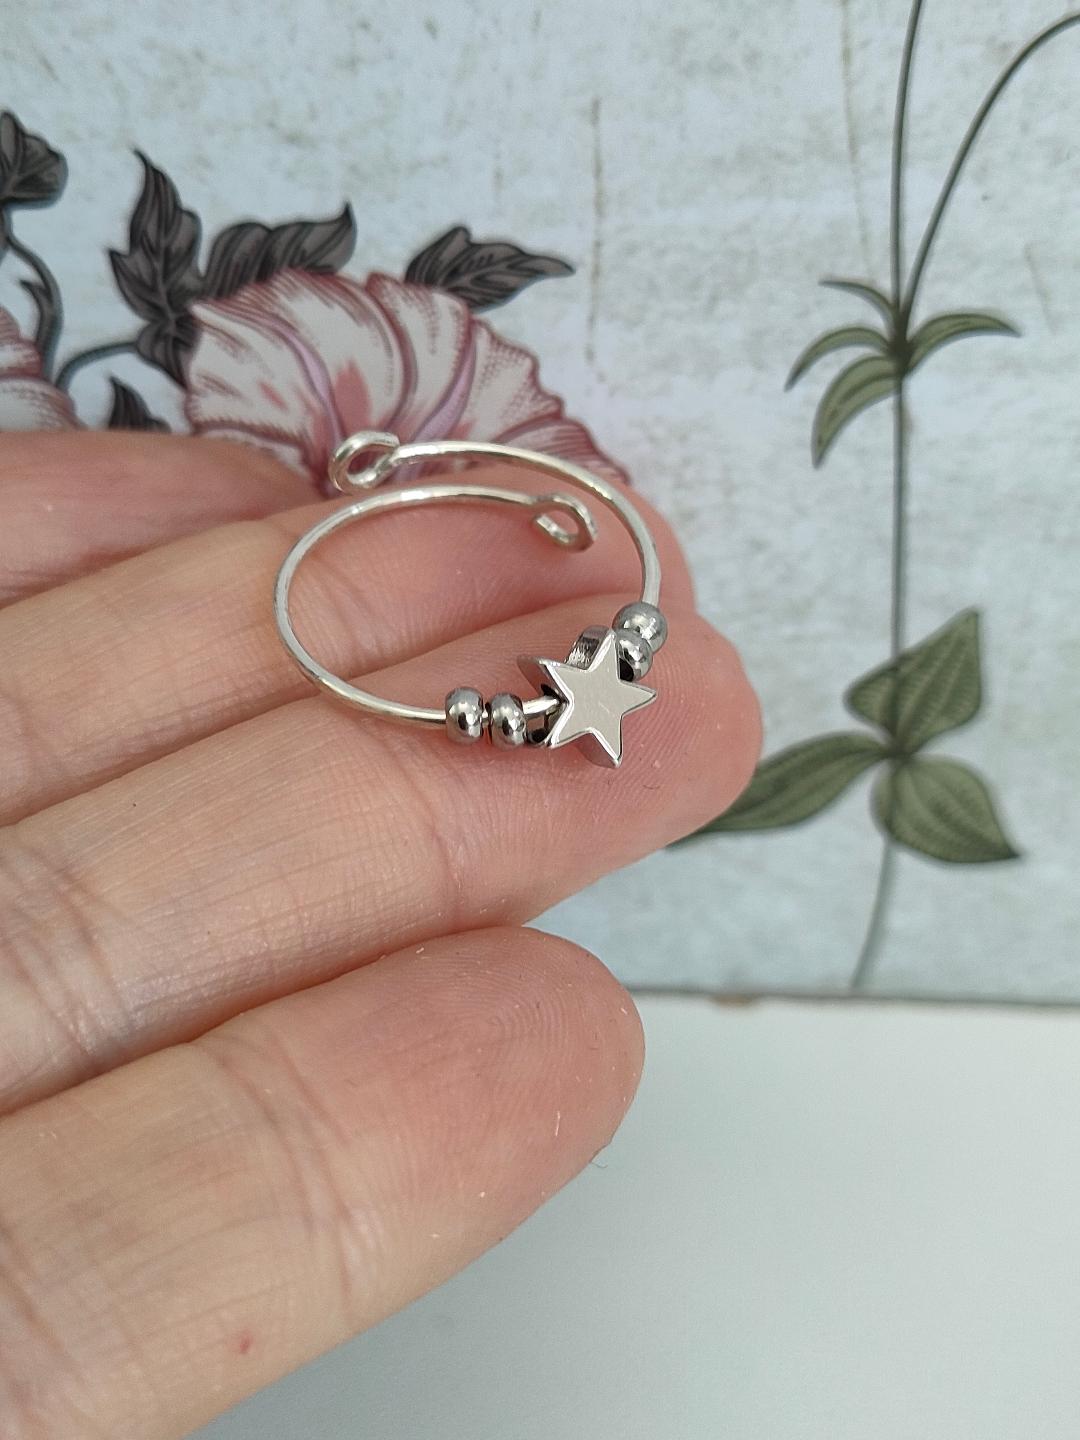 Single Twist 925 Sterling Silver Star Fidget ring, Anxiety ring for Nail Biting, Thin Fidget Ring, (one size) (1mm thick) Hand Hammered Ring